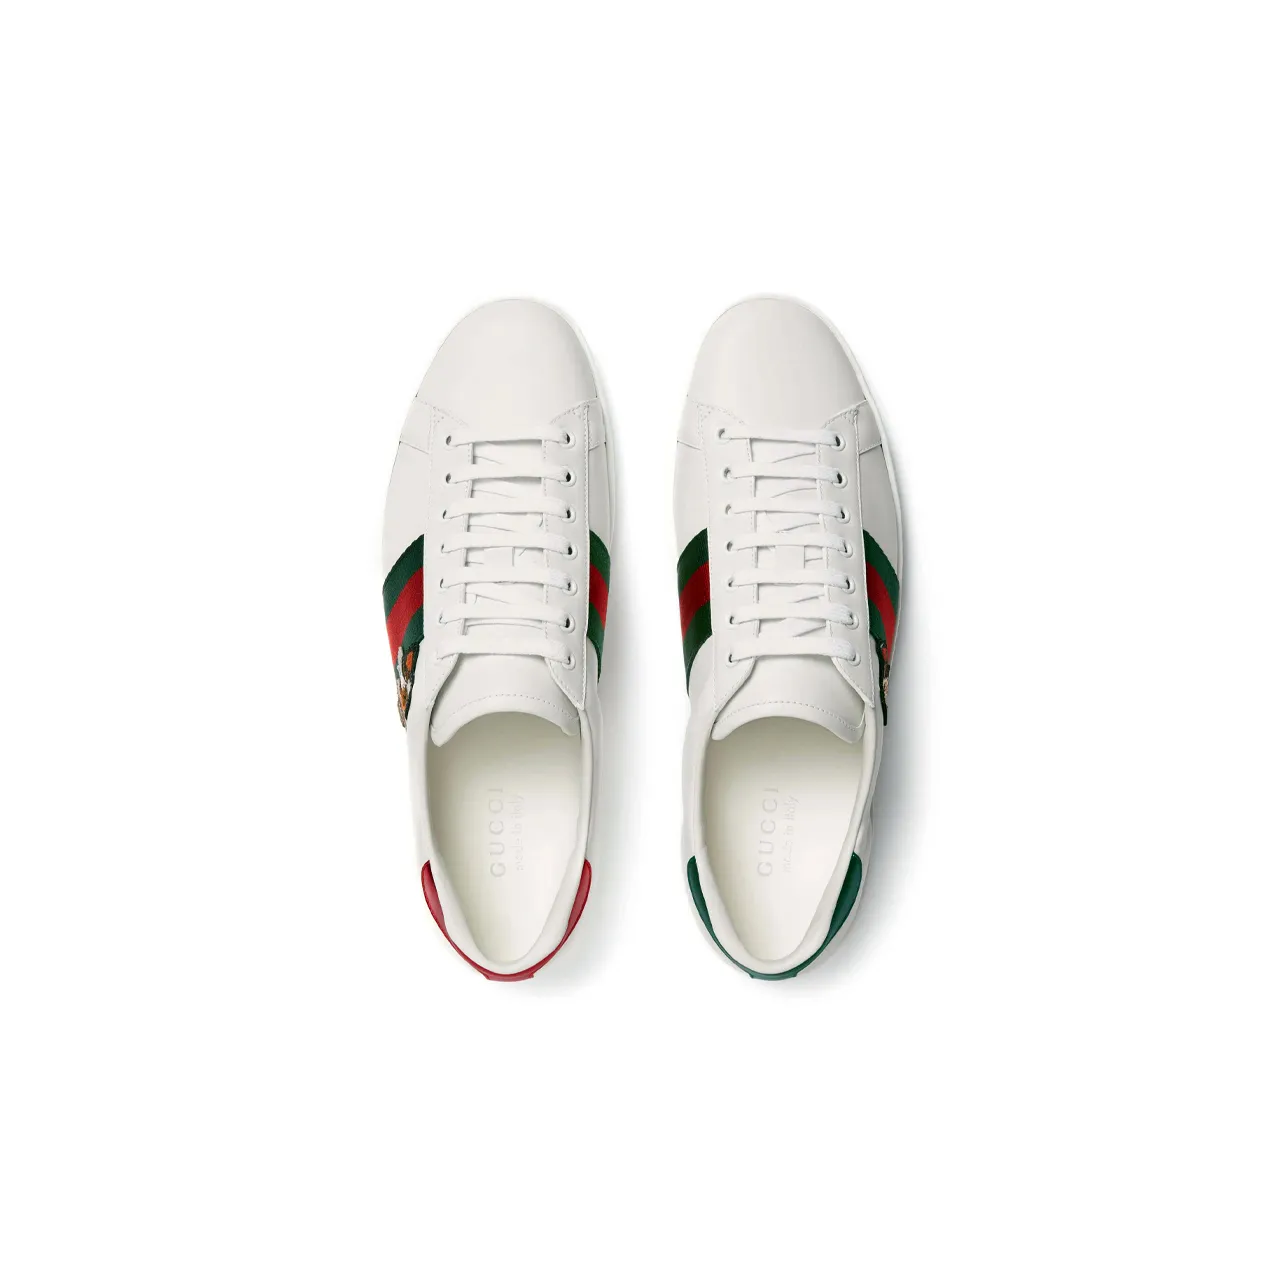 Gucci Ace 'Year of the Dog'